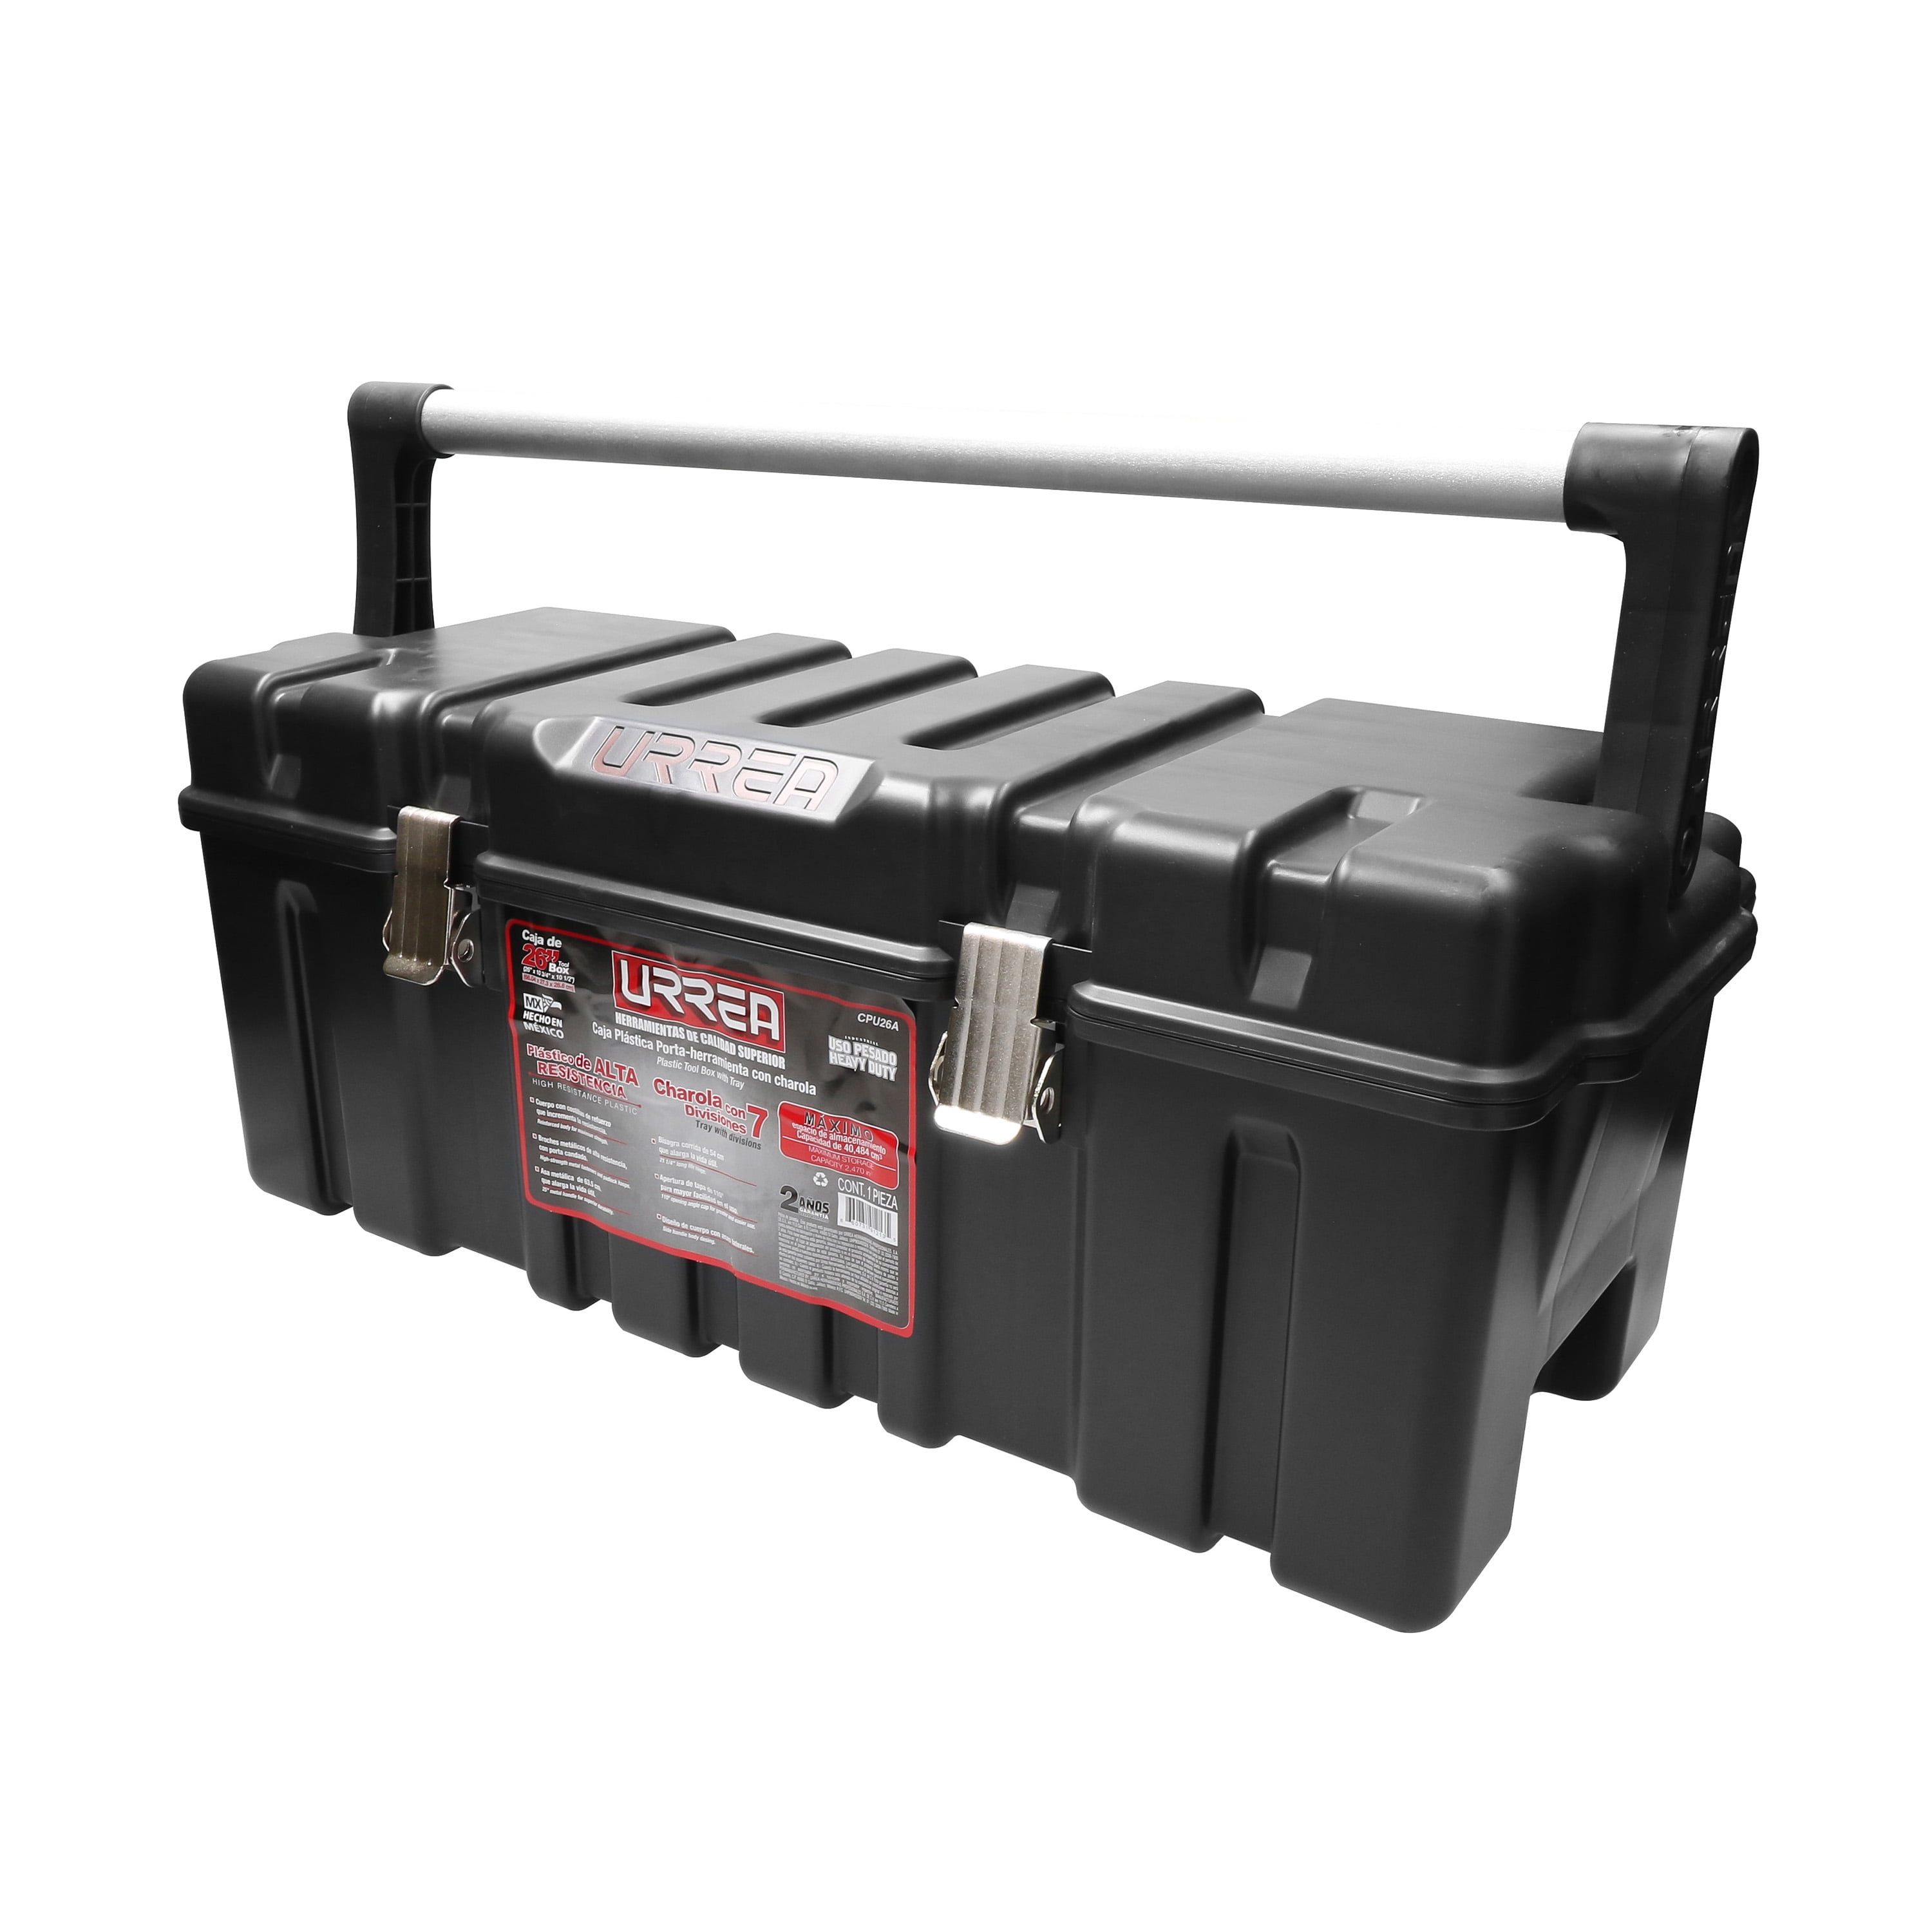 Urrea Heavy Duty 26 in Plastic Tool Box with Metallic Latches and Plastic Tray